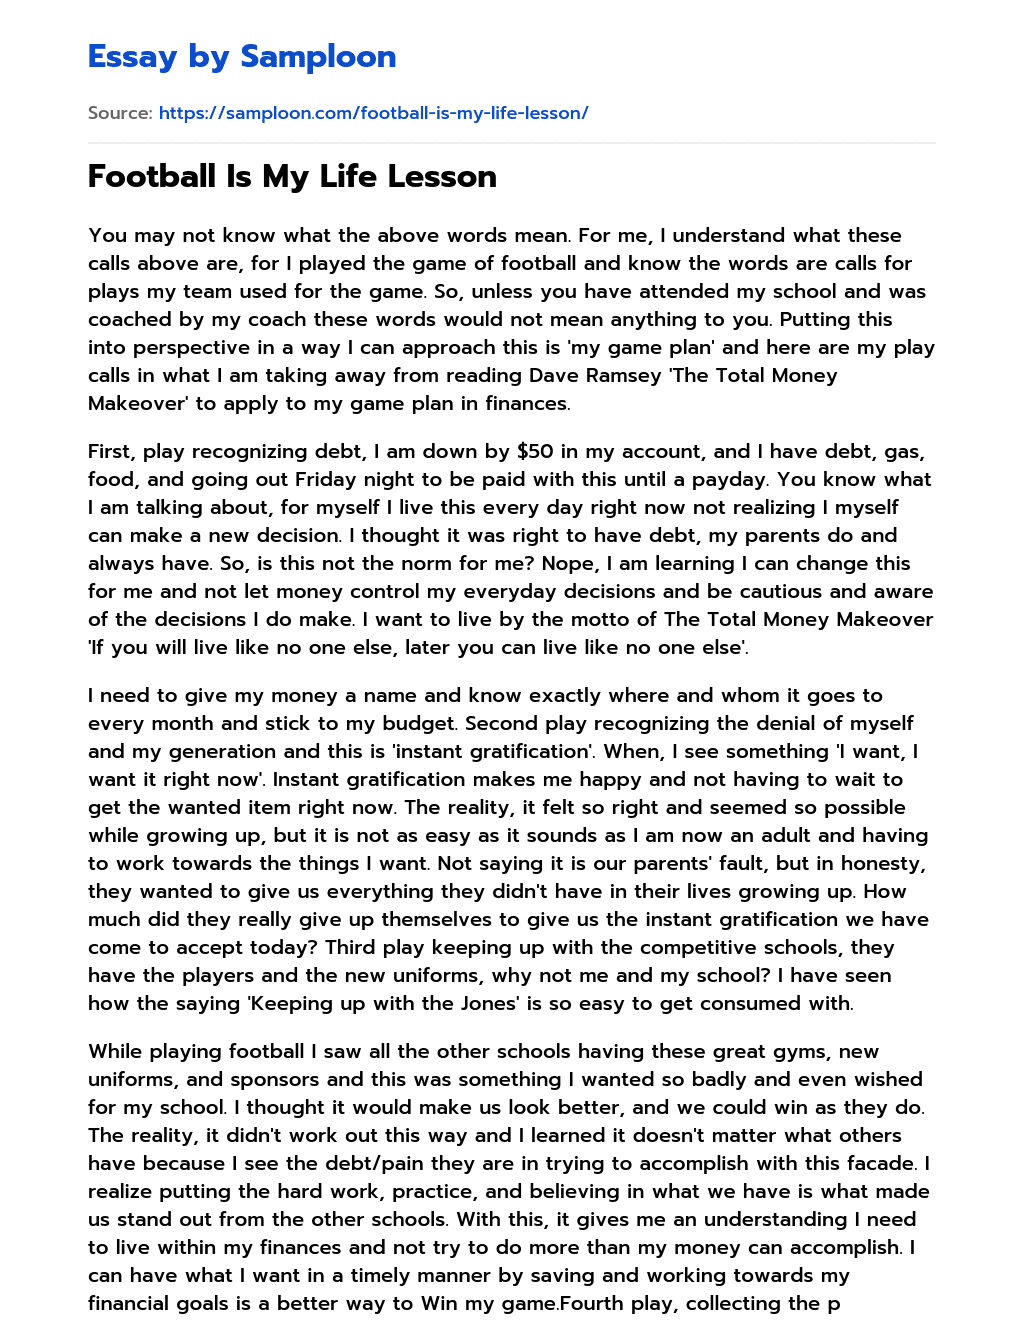 Football Is My Life Lesson essay